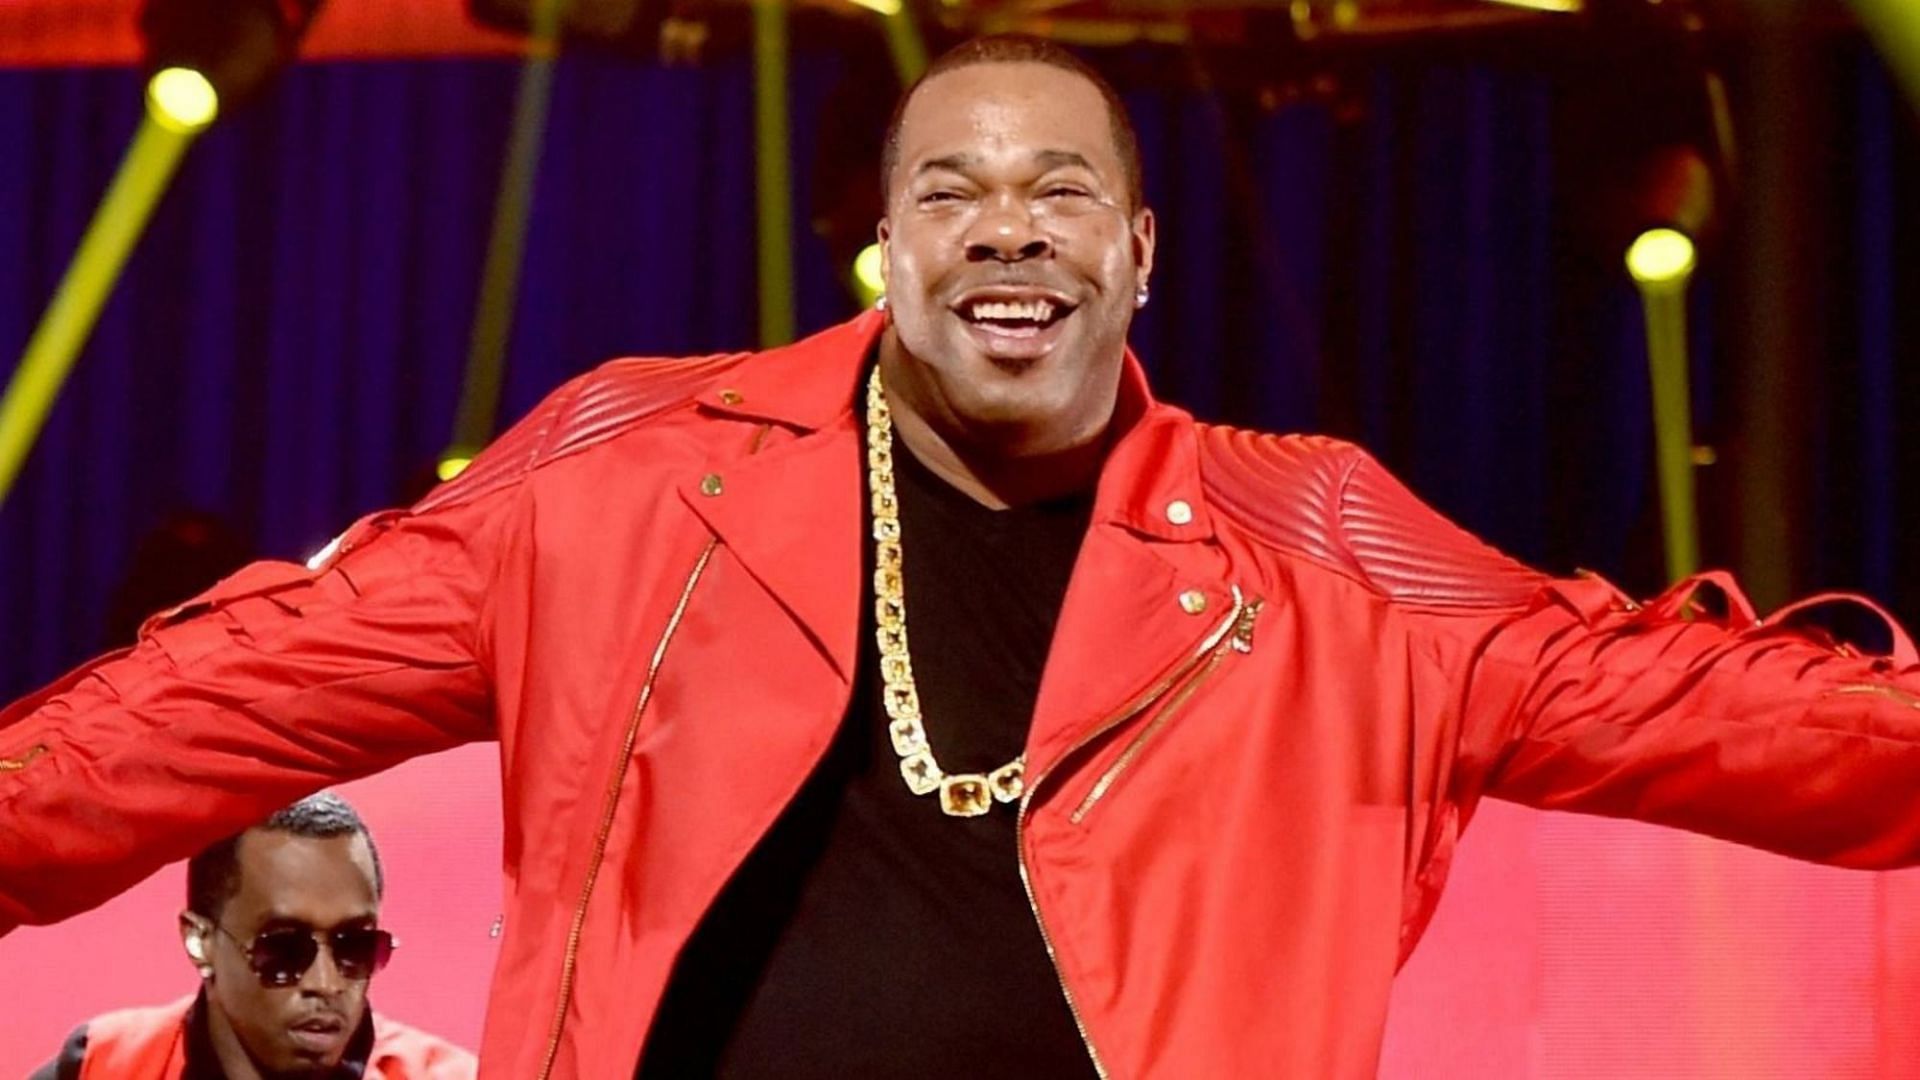 Busta Rhymes garners support after throwing drink at woman who grabbed his derriere (Image via Getty Images)